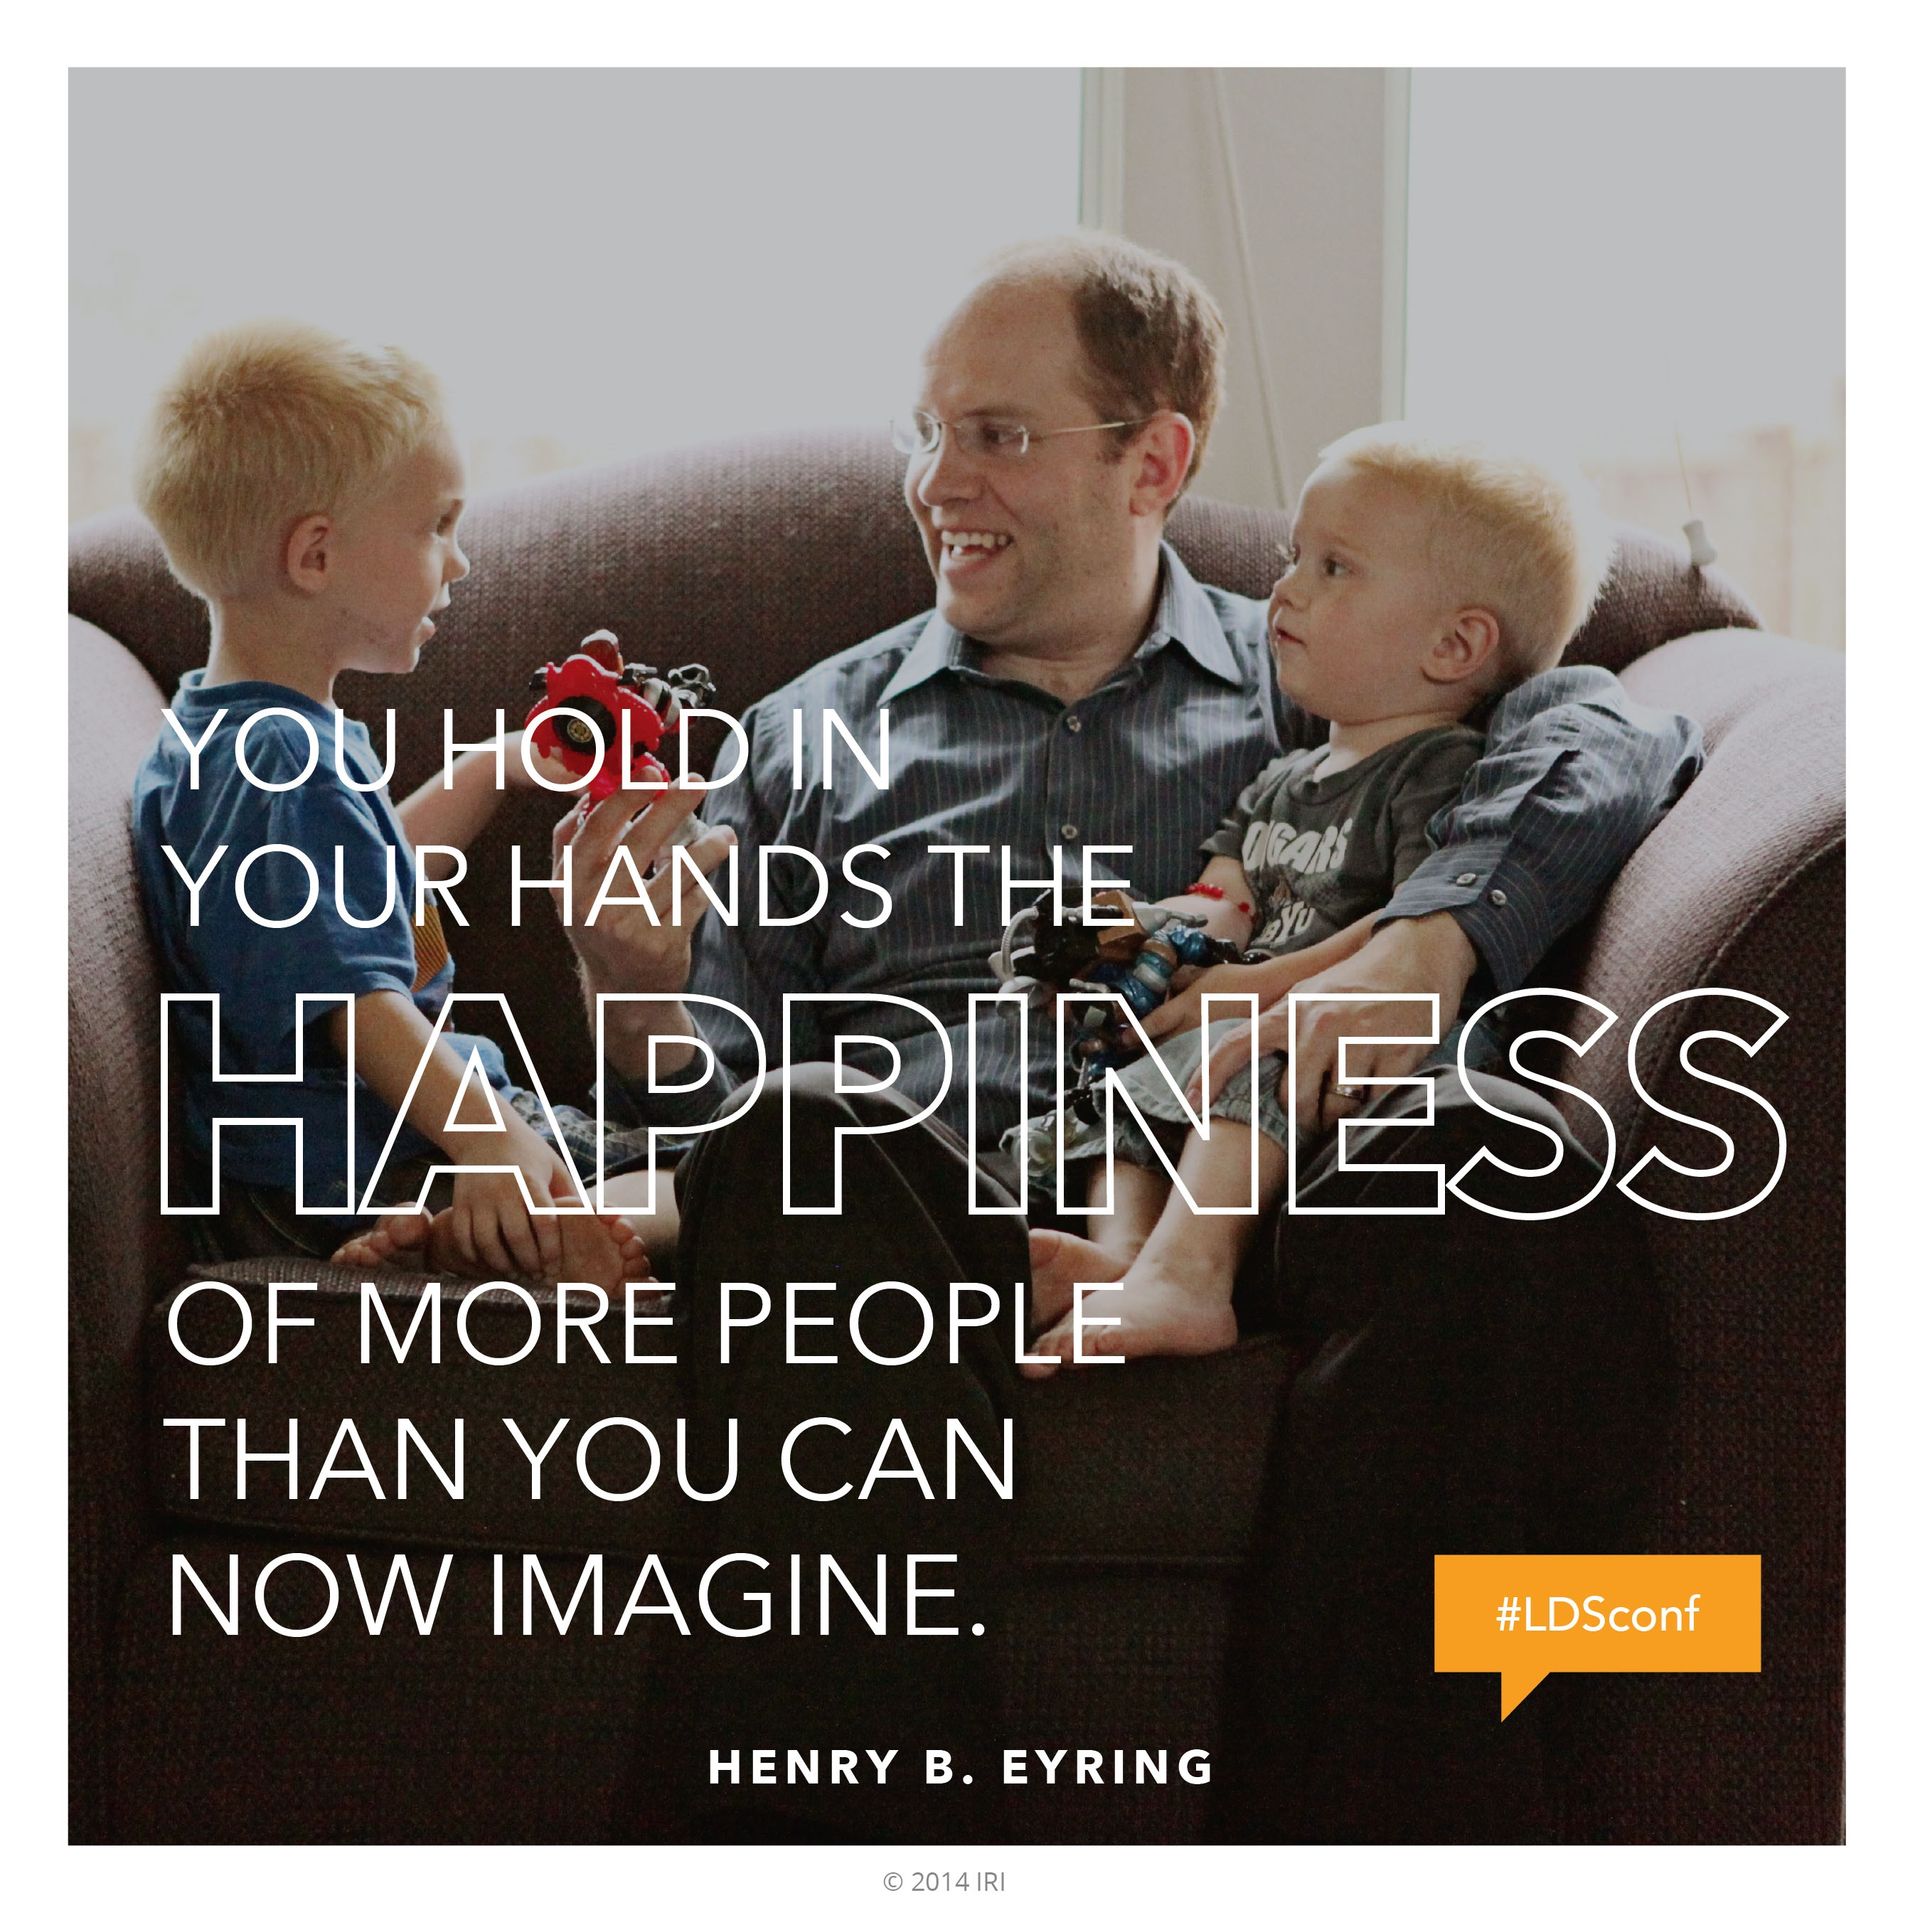 “You hold in your hands the happiness of more people than you can now imagine.”—President Henry B. Eyring, “A Priceless Heritage of Hope” © undefined ipCode 1.